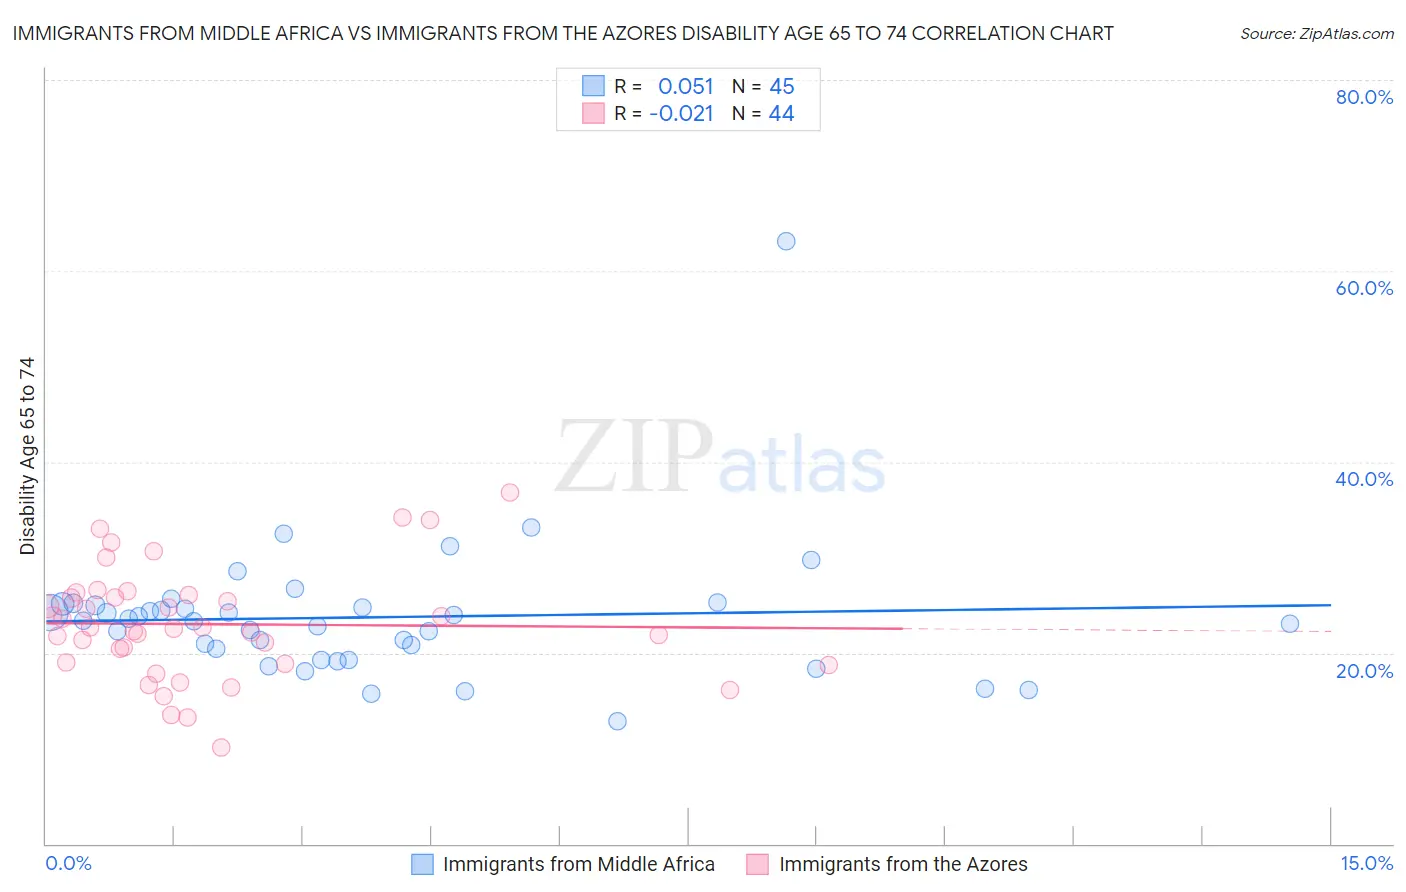 Immigrants from Middle Africa vs Immigrants from the Azores Disability Age 65 to 74